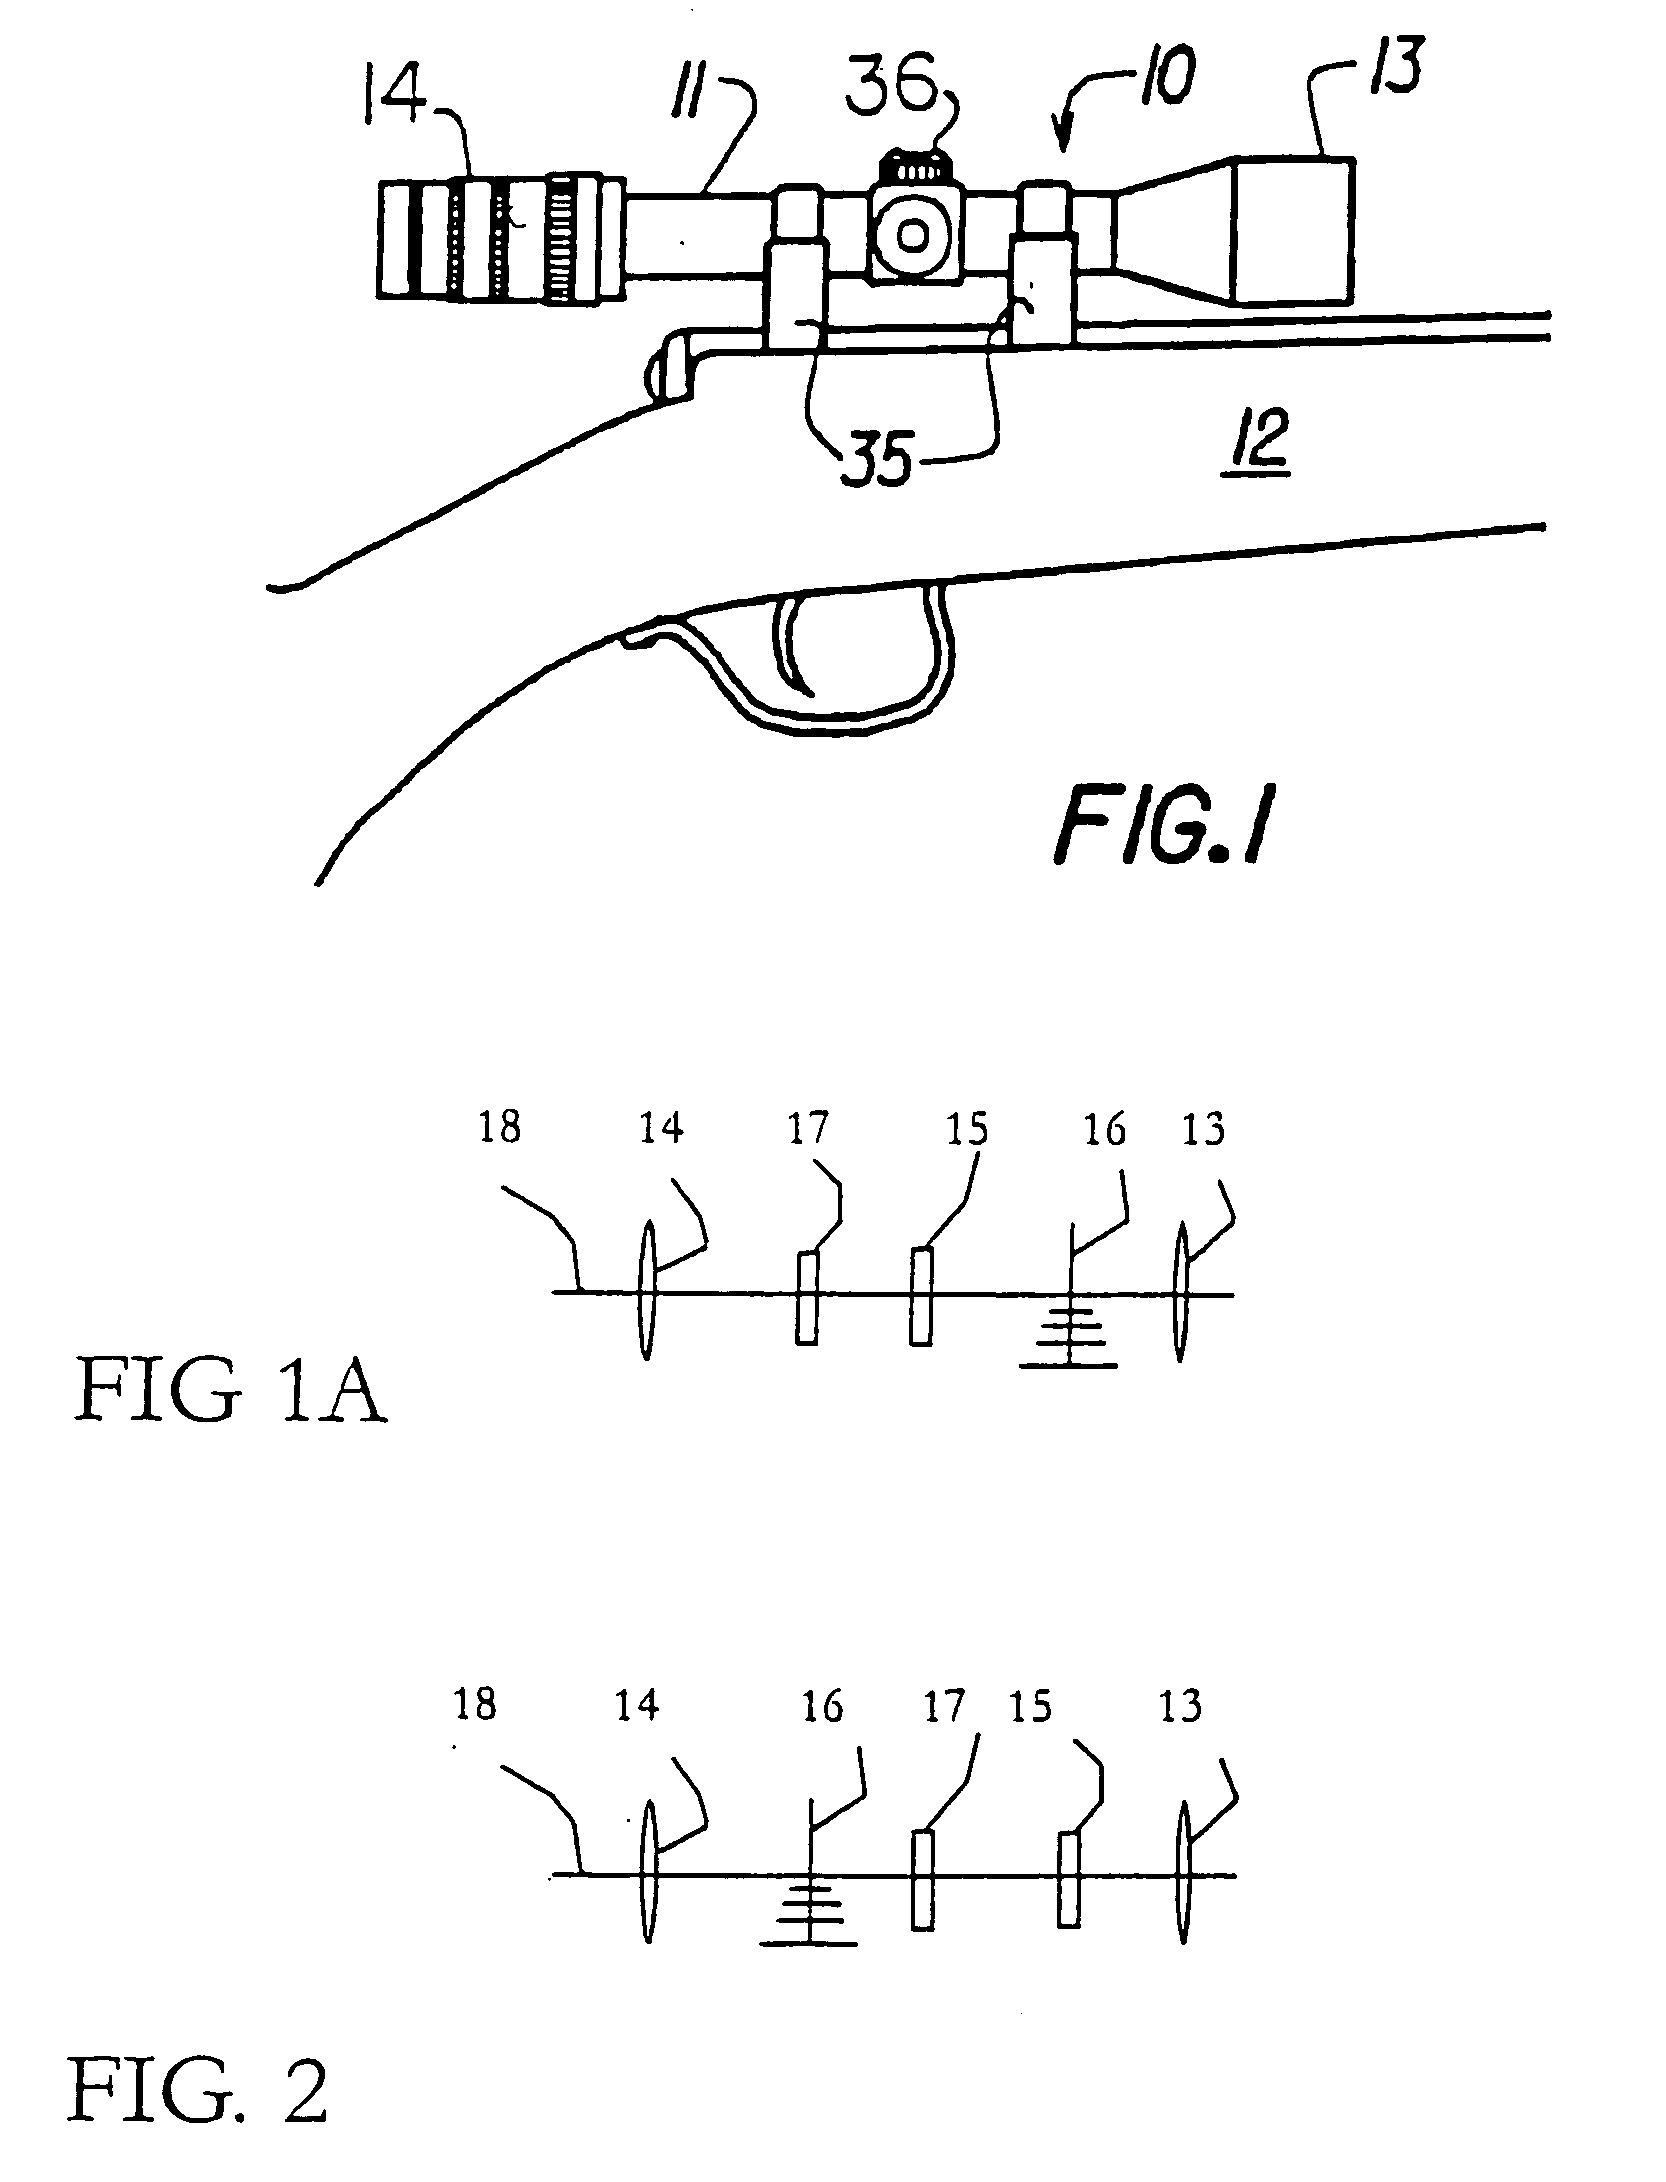 Reticle for telescopic gunsight and method for using